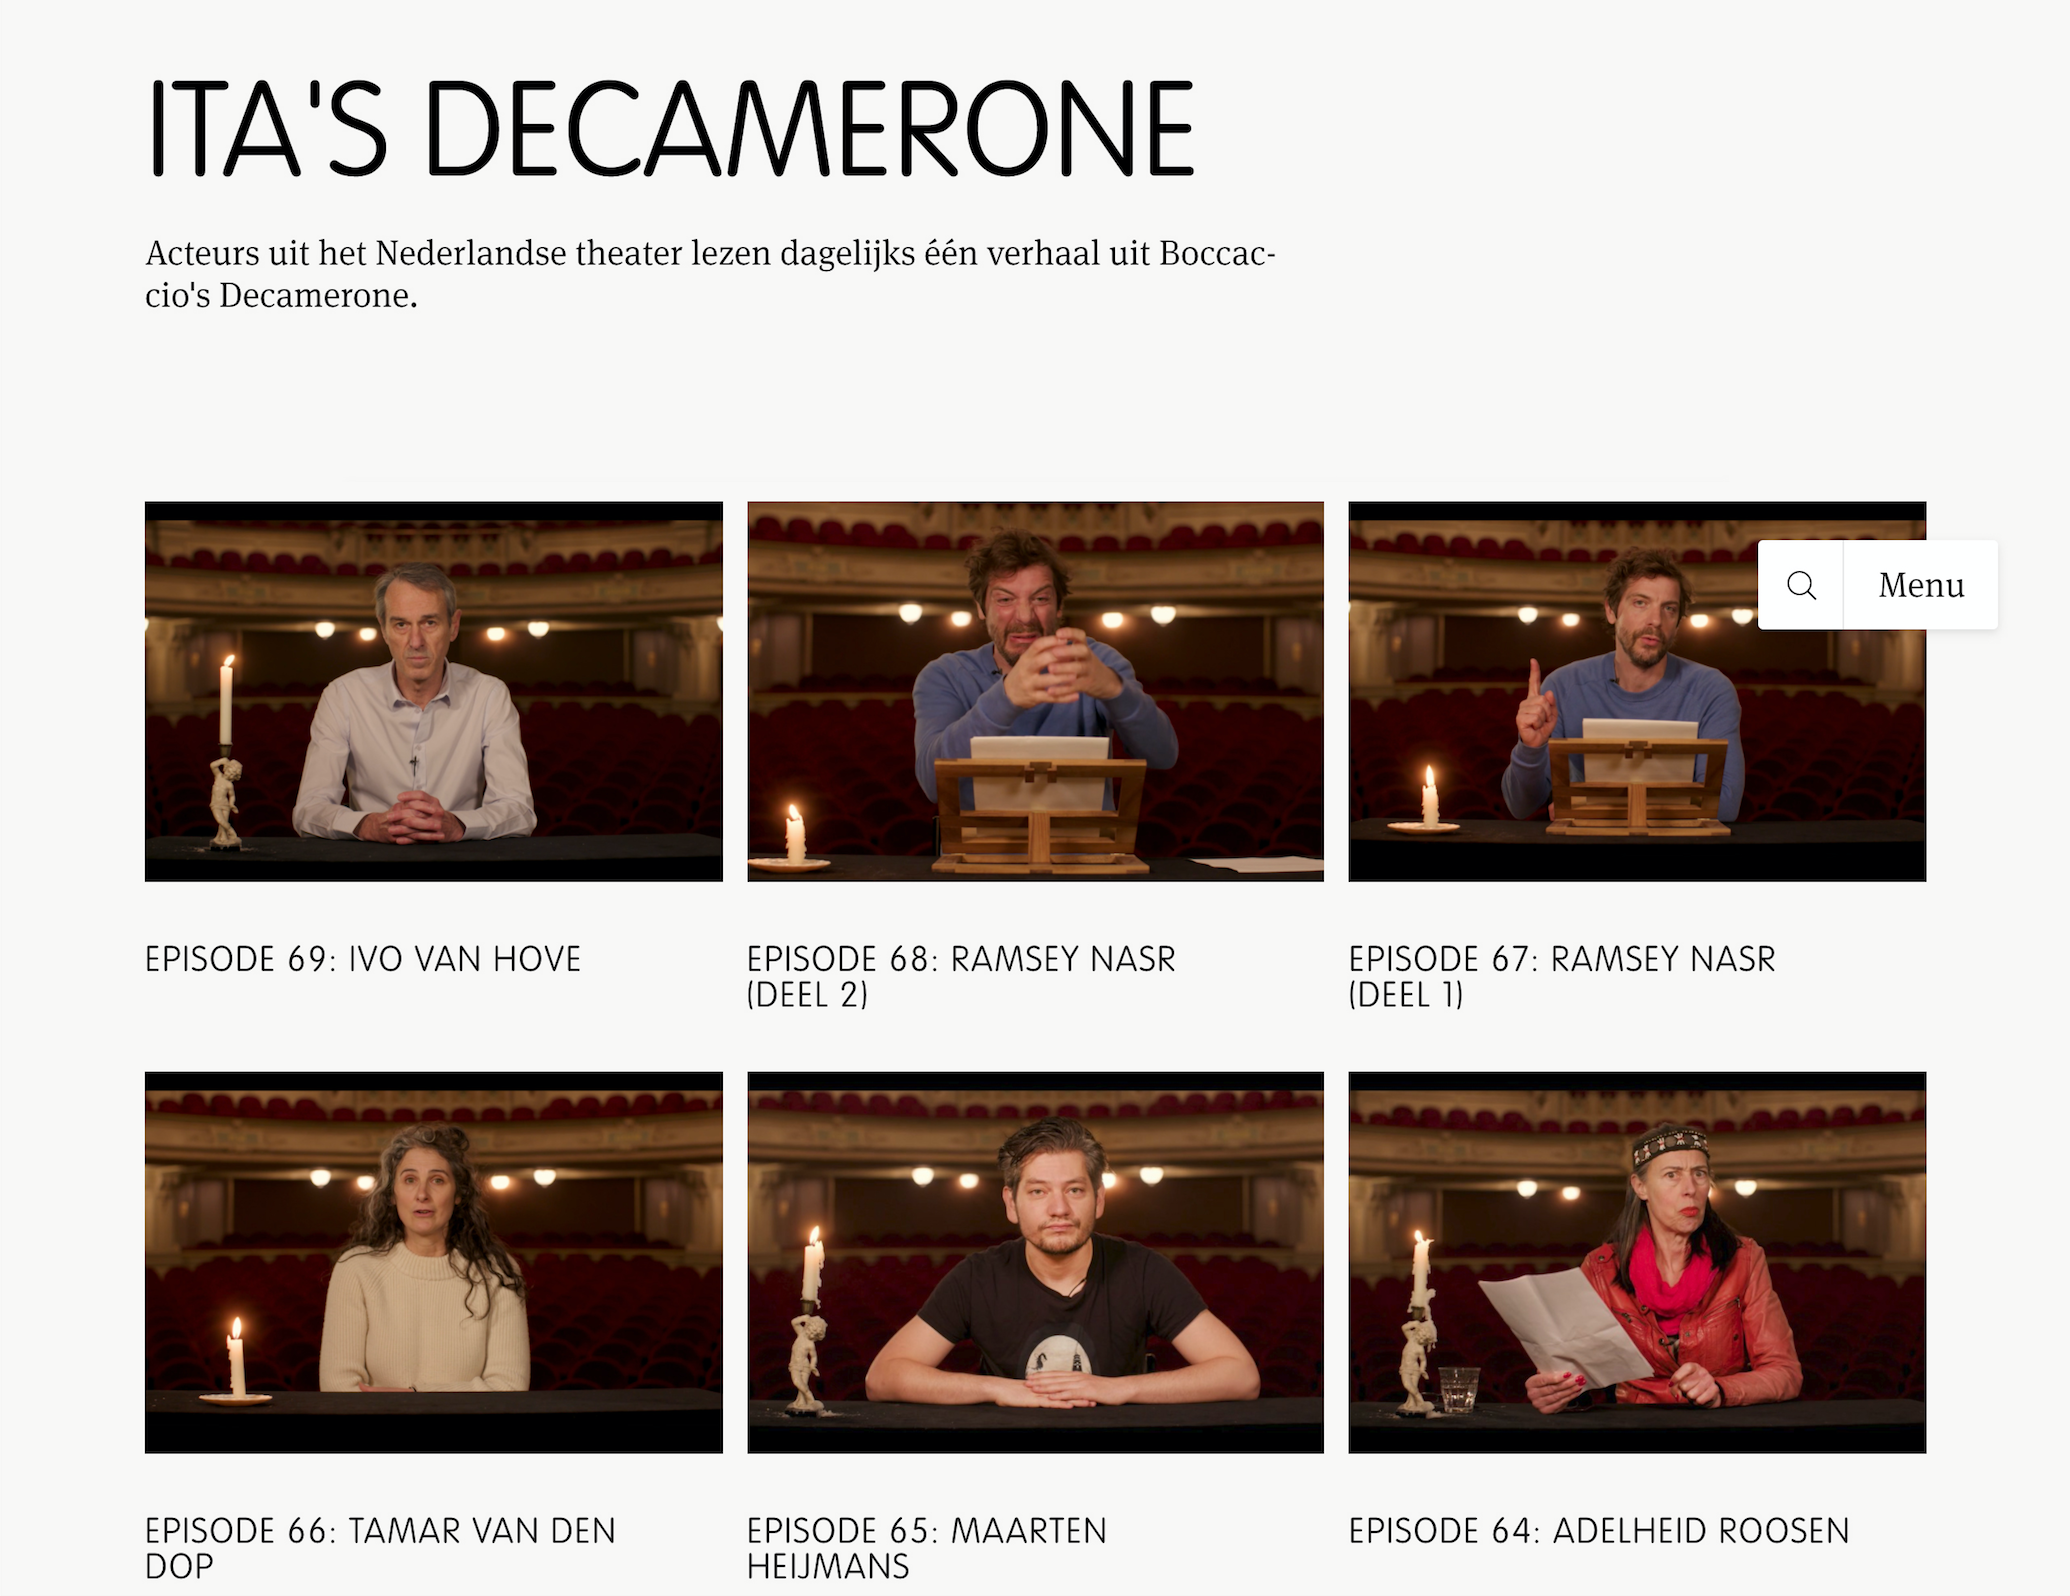 <center>ITA's Decameron project is an online marathon recording of Dutch actors reading a new story daily from Boccaccio's The Decameron — a collection of 100 stories from the 14th century Black Death retold for a time of global pandemic. (Image from the ITA website)</center>